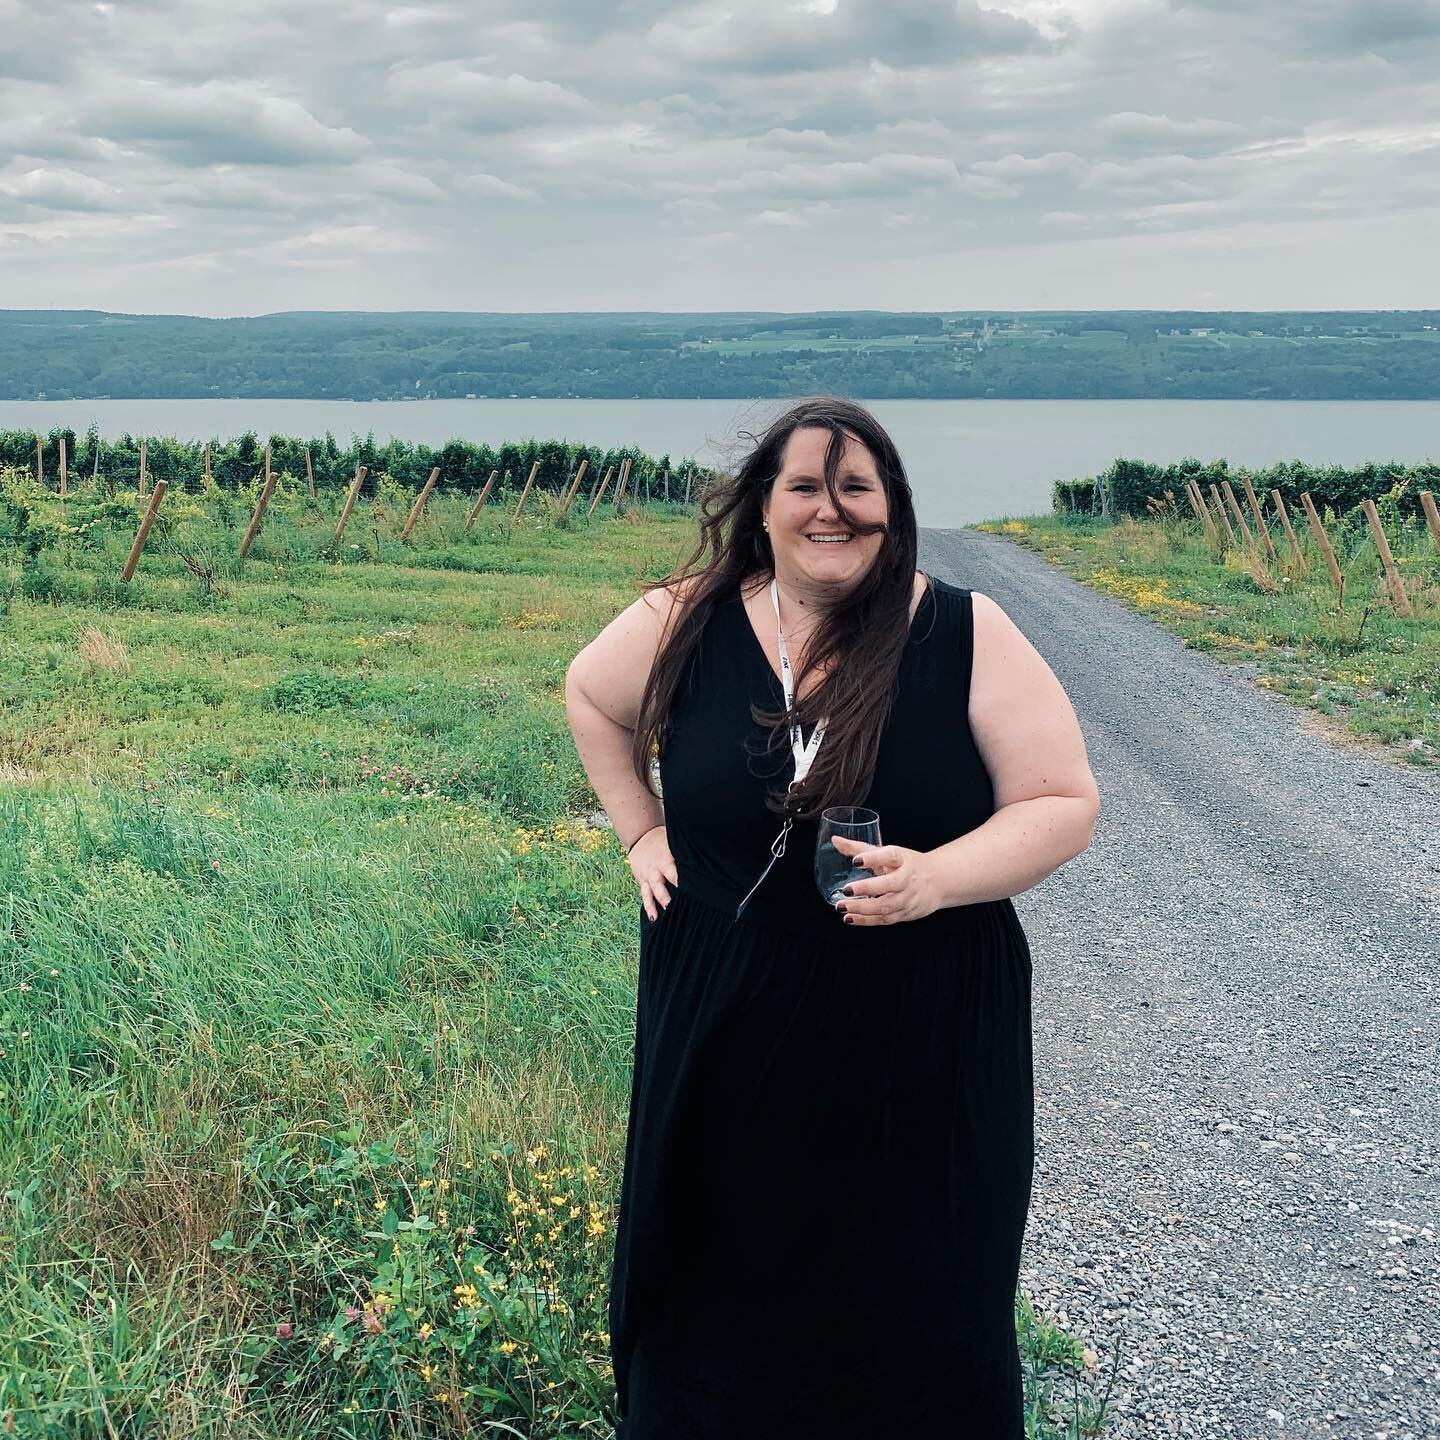 There&rsquo;s a special place in my heart for the Finger Lakes. ❤️ 
&hellip;
I&rsquo;m back in Pittsburgh after an exciting time at @flxcursion. We learned, listened, discussed, bonded, and tasted our way through seminars, meals, and activities. We e